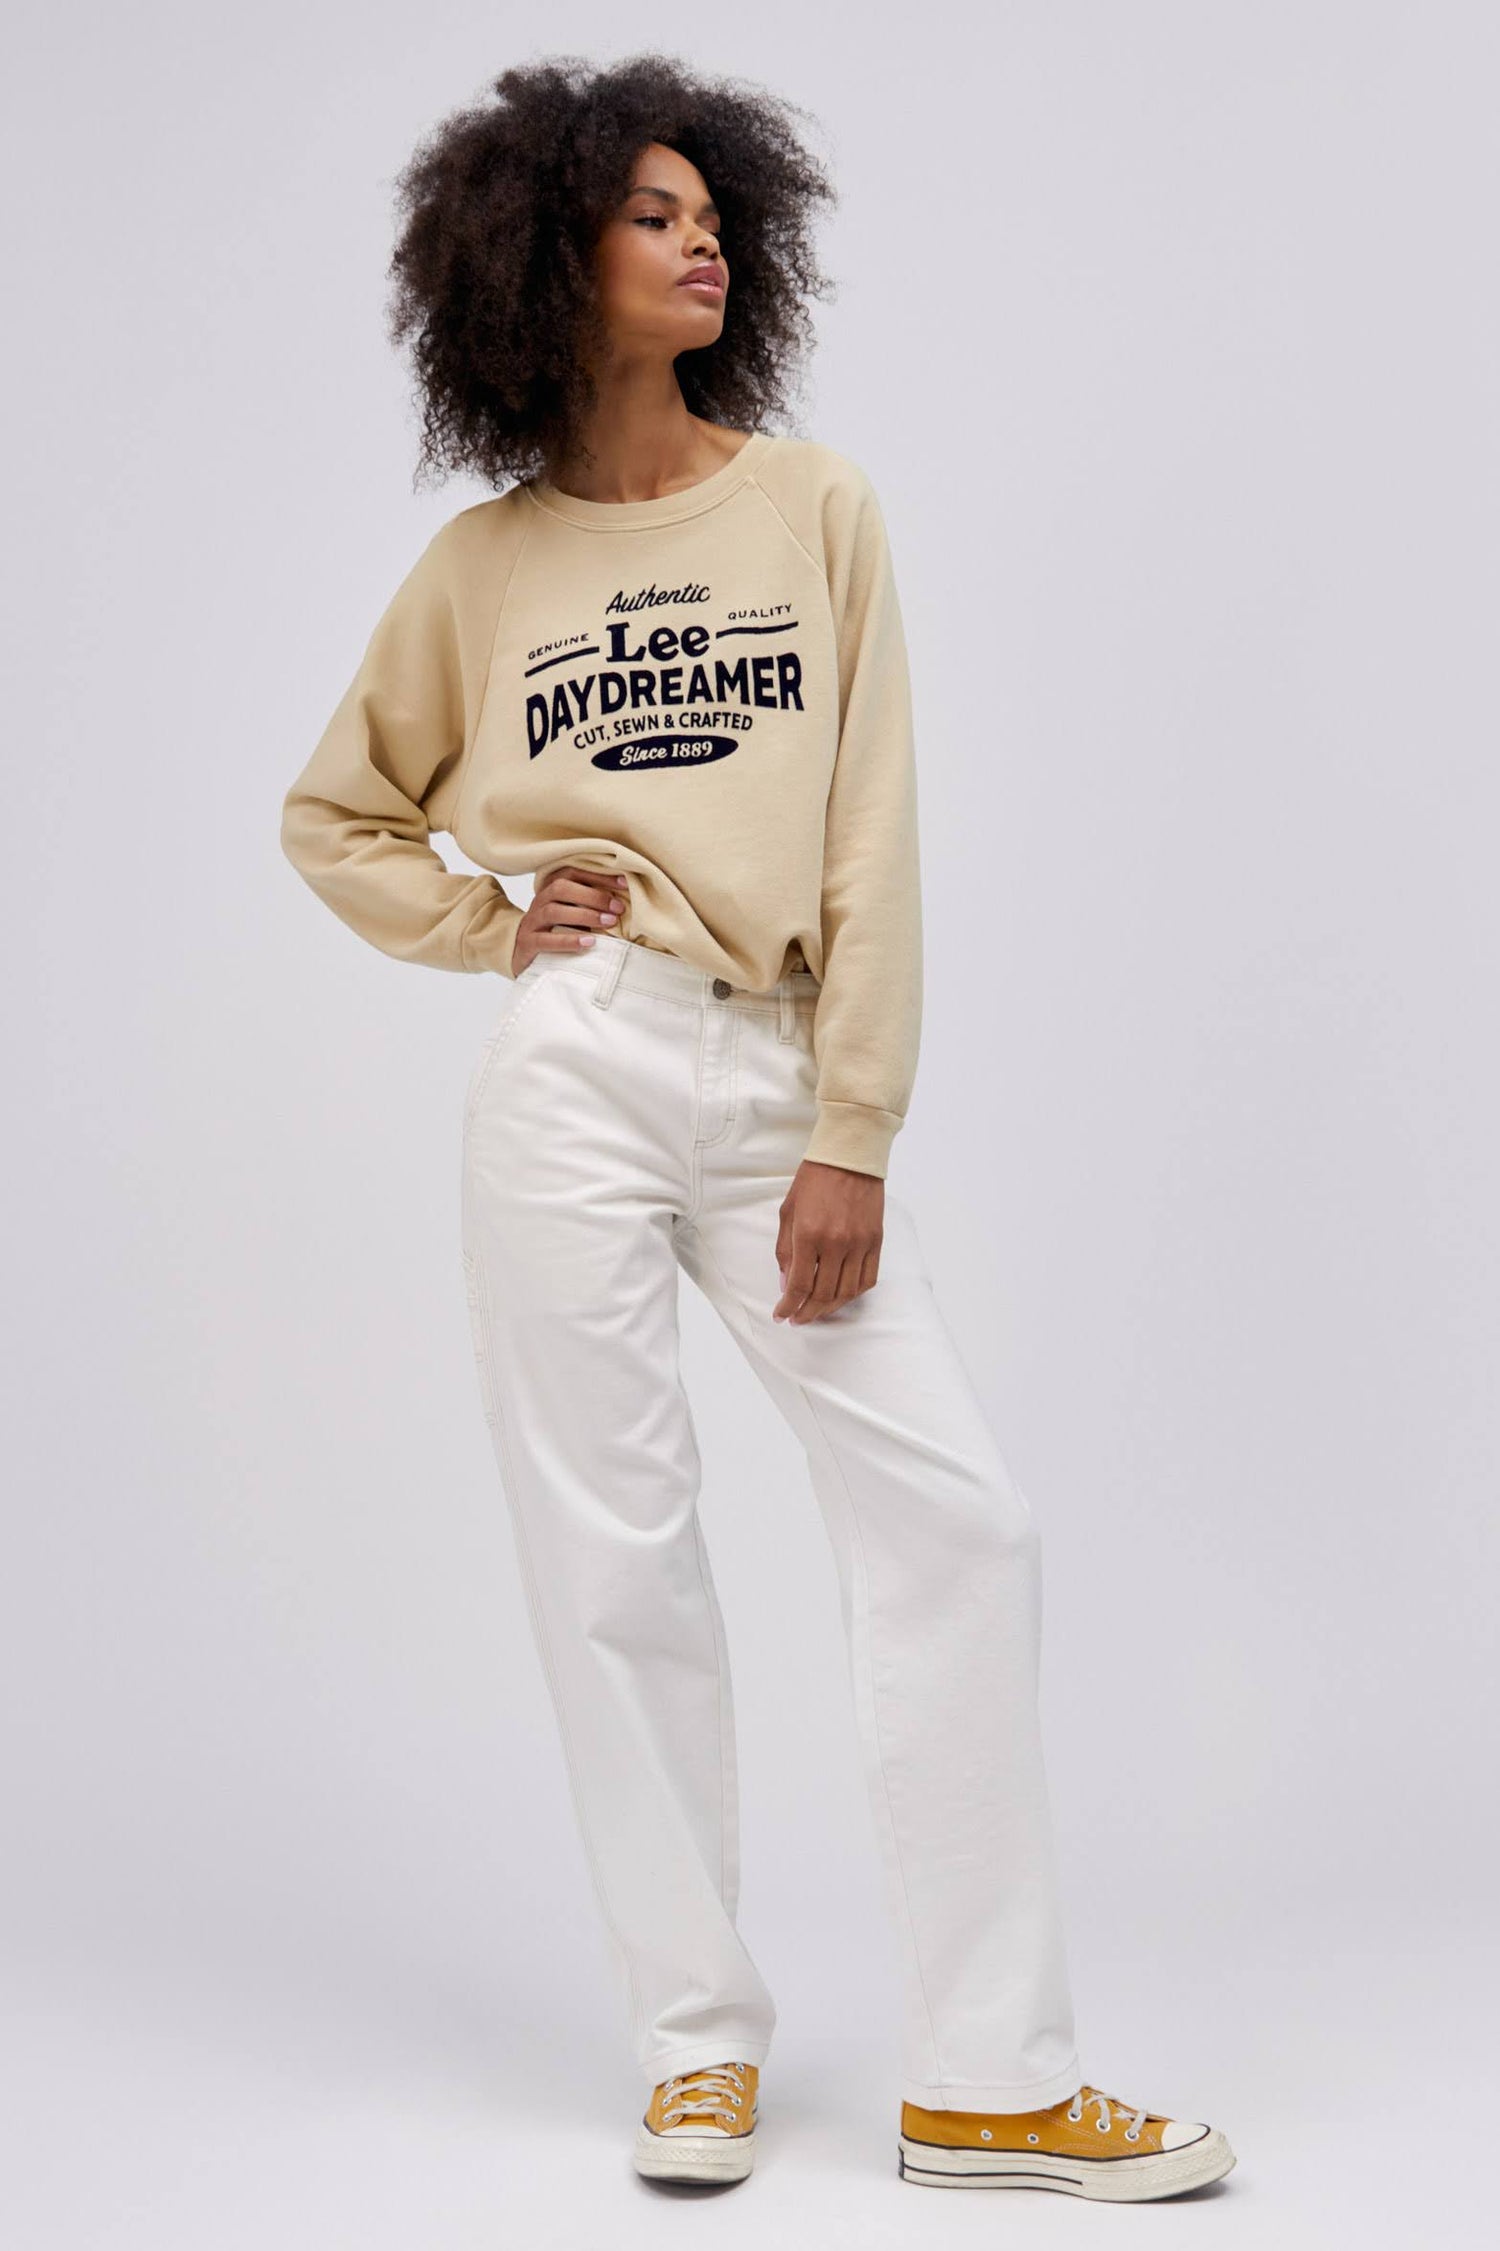 curly haired model posing with hand on hip wearing khaki colored sweatshirt and white workwear pants